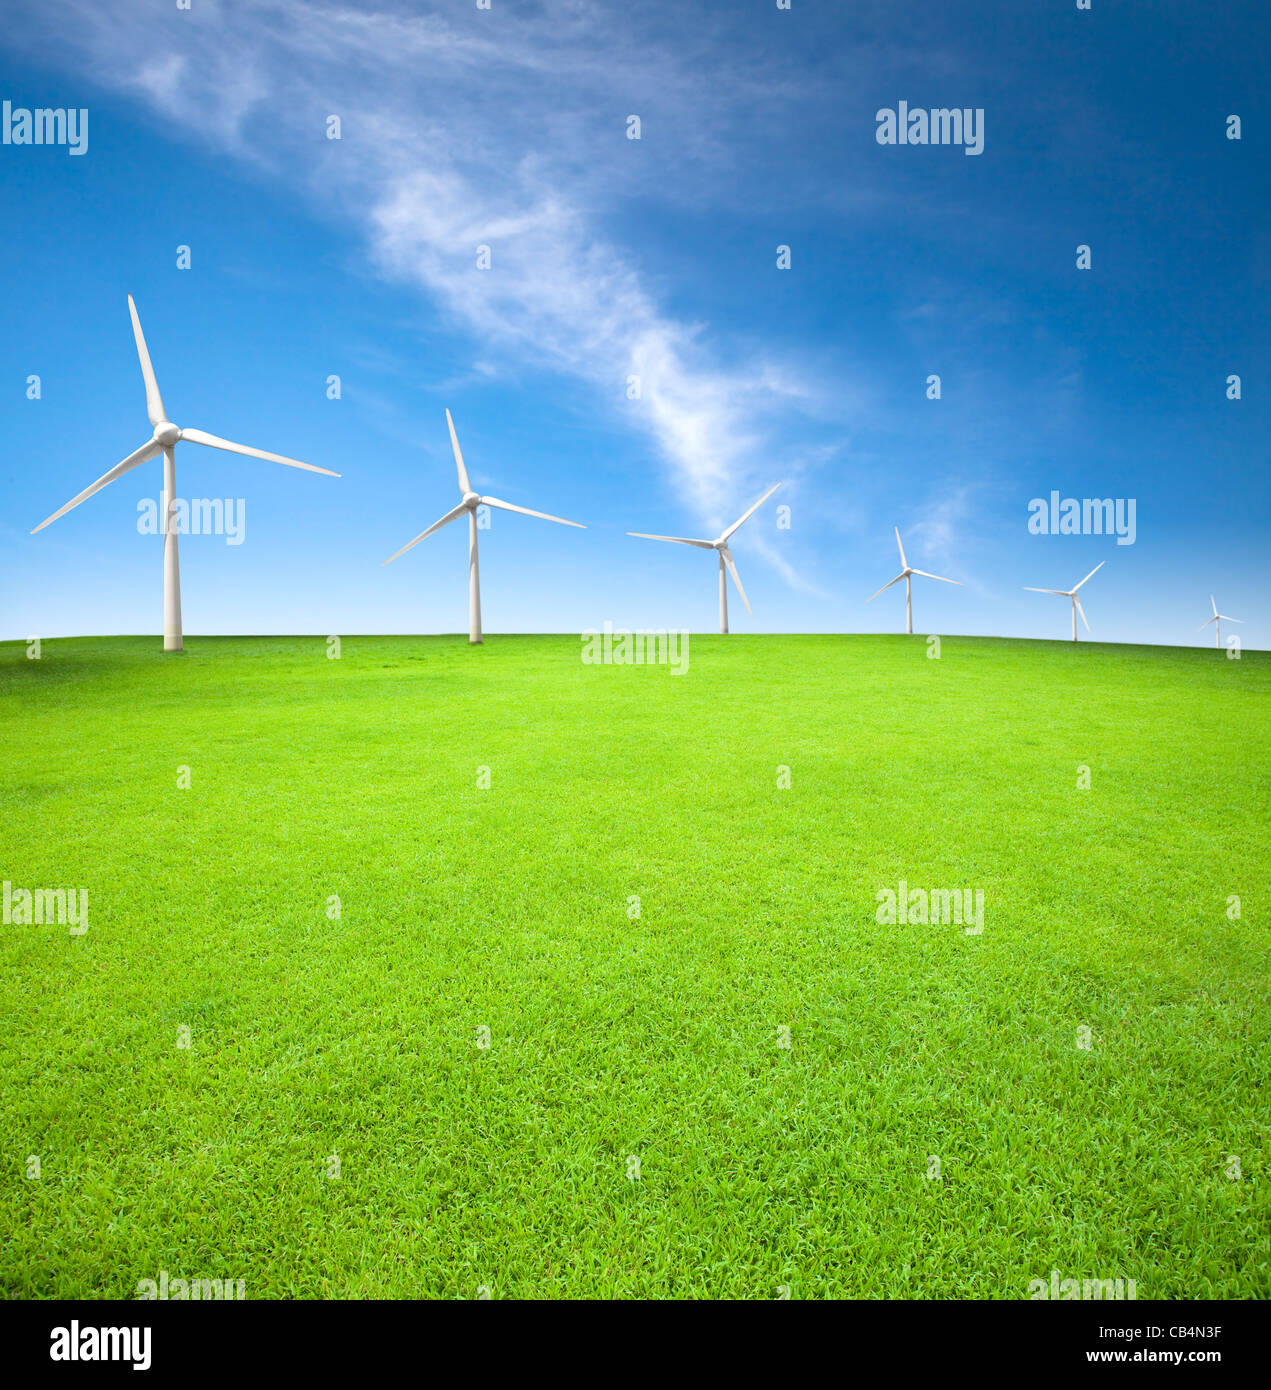 Wind turbines in an green field with cloud background Stock Photo